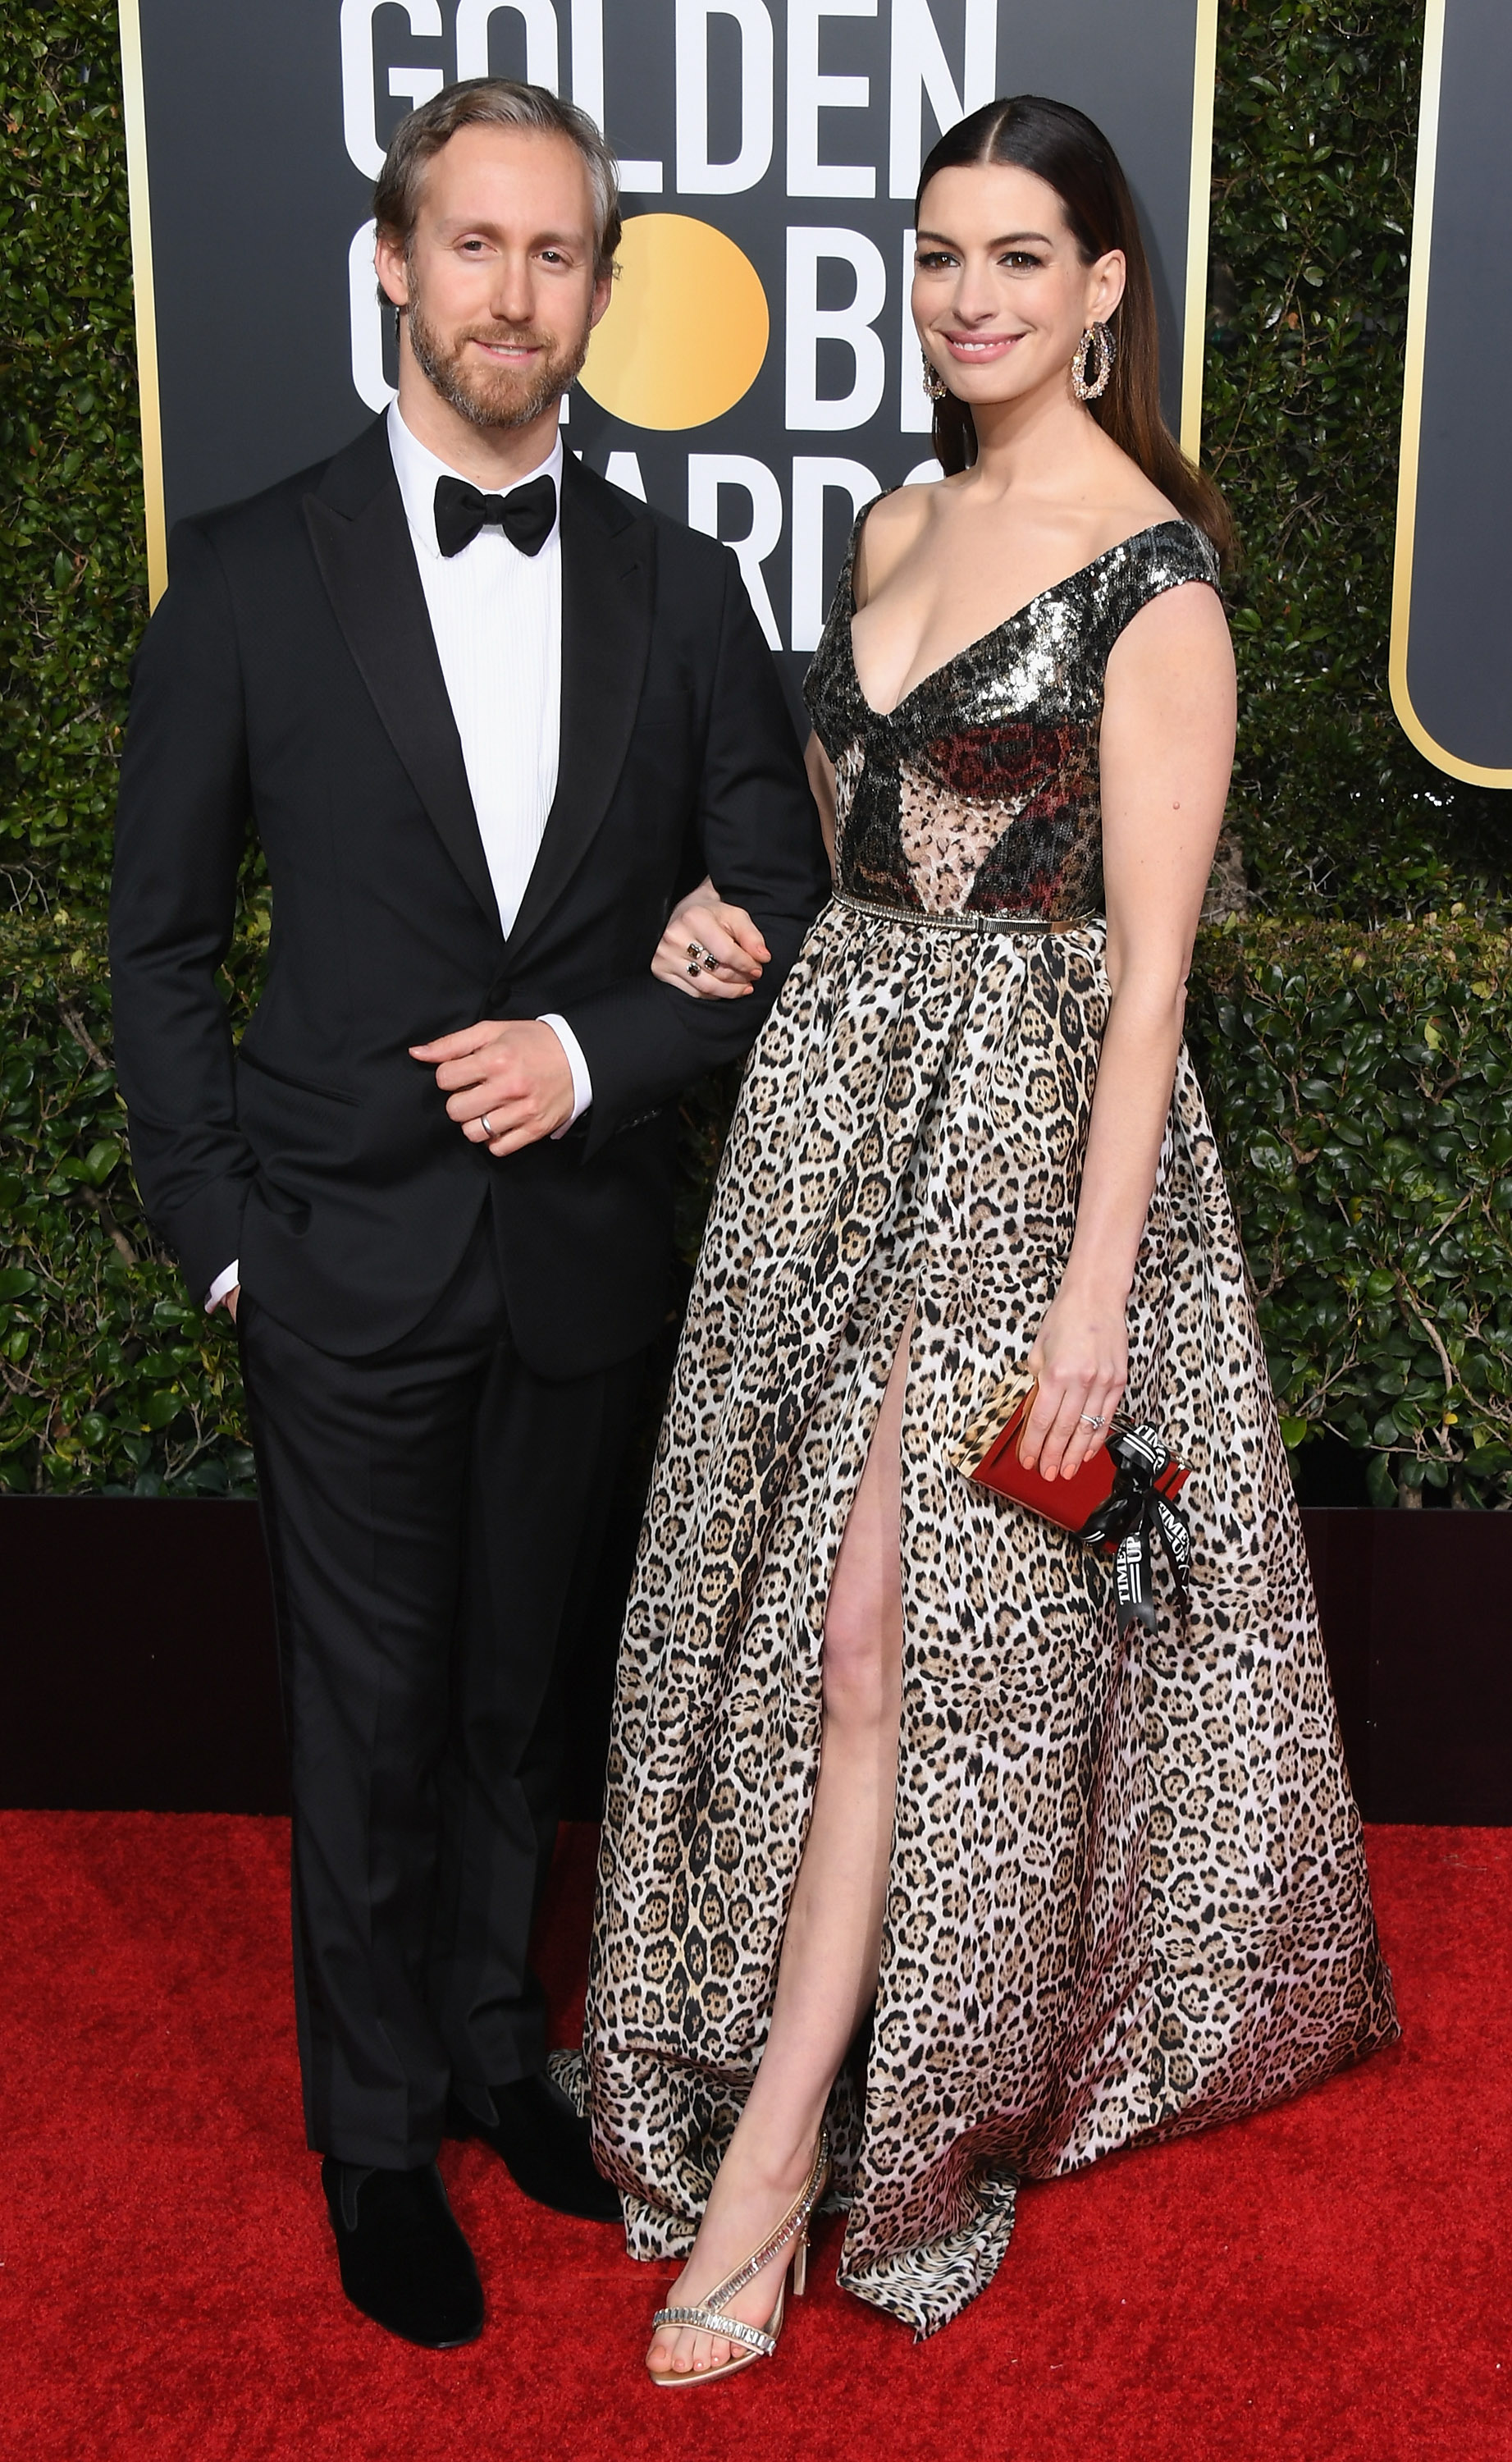 Anne with her husband, Adam Shulman, at the 2019 Golden Globe Awards